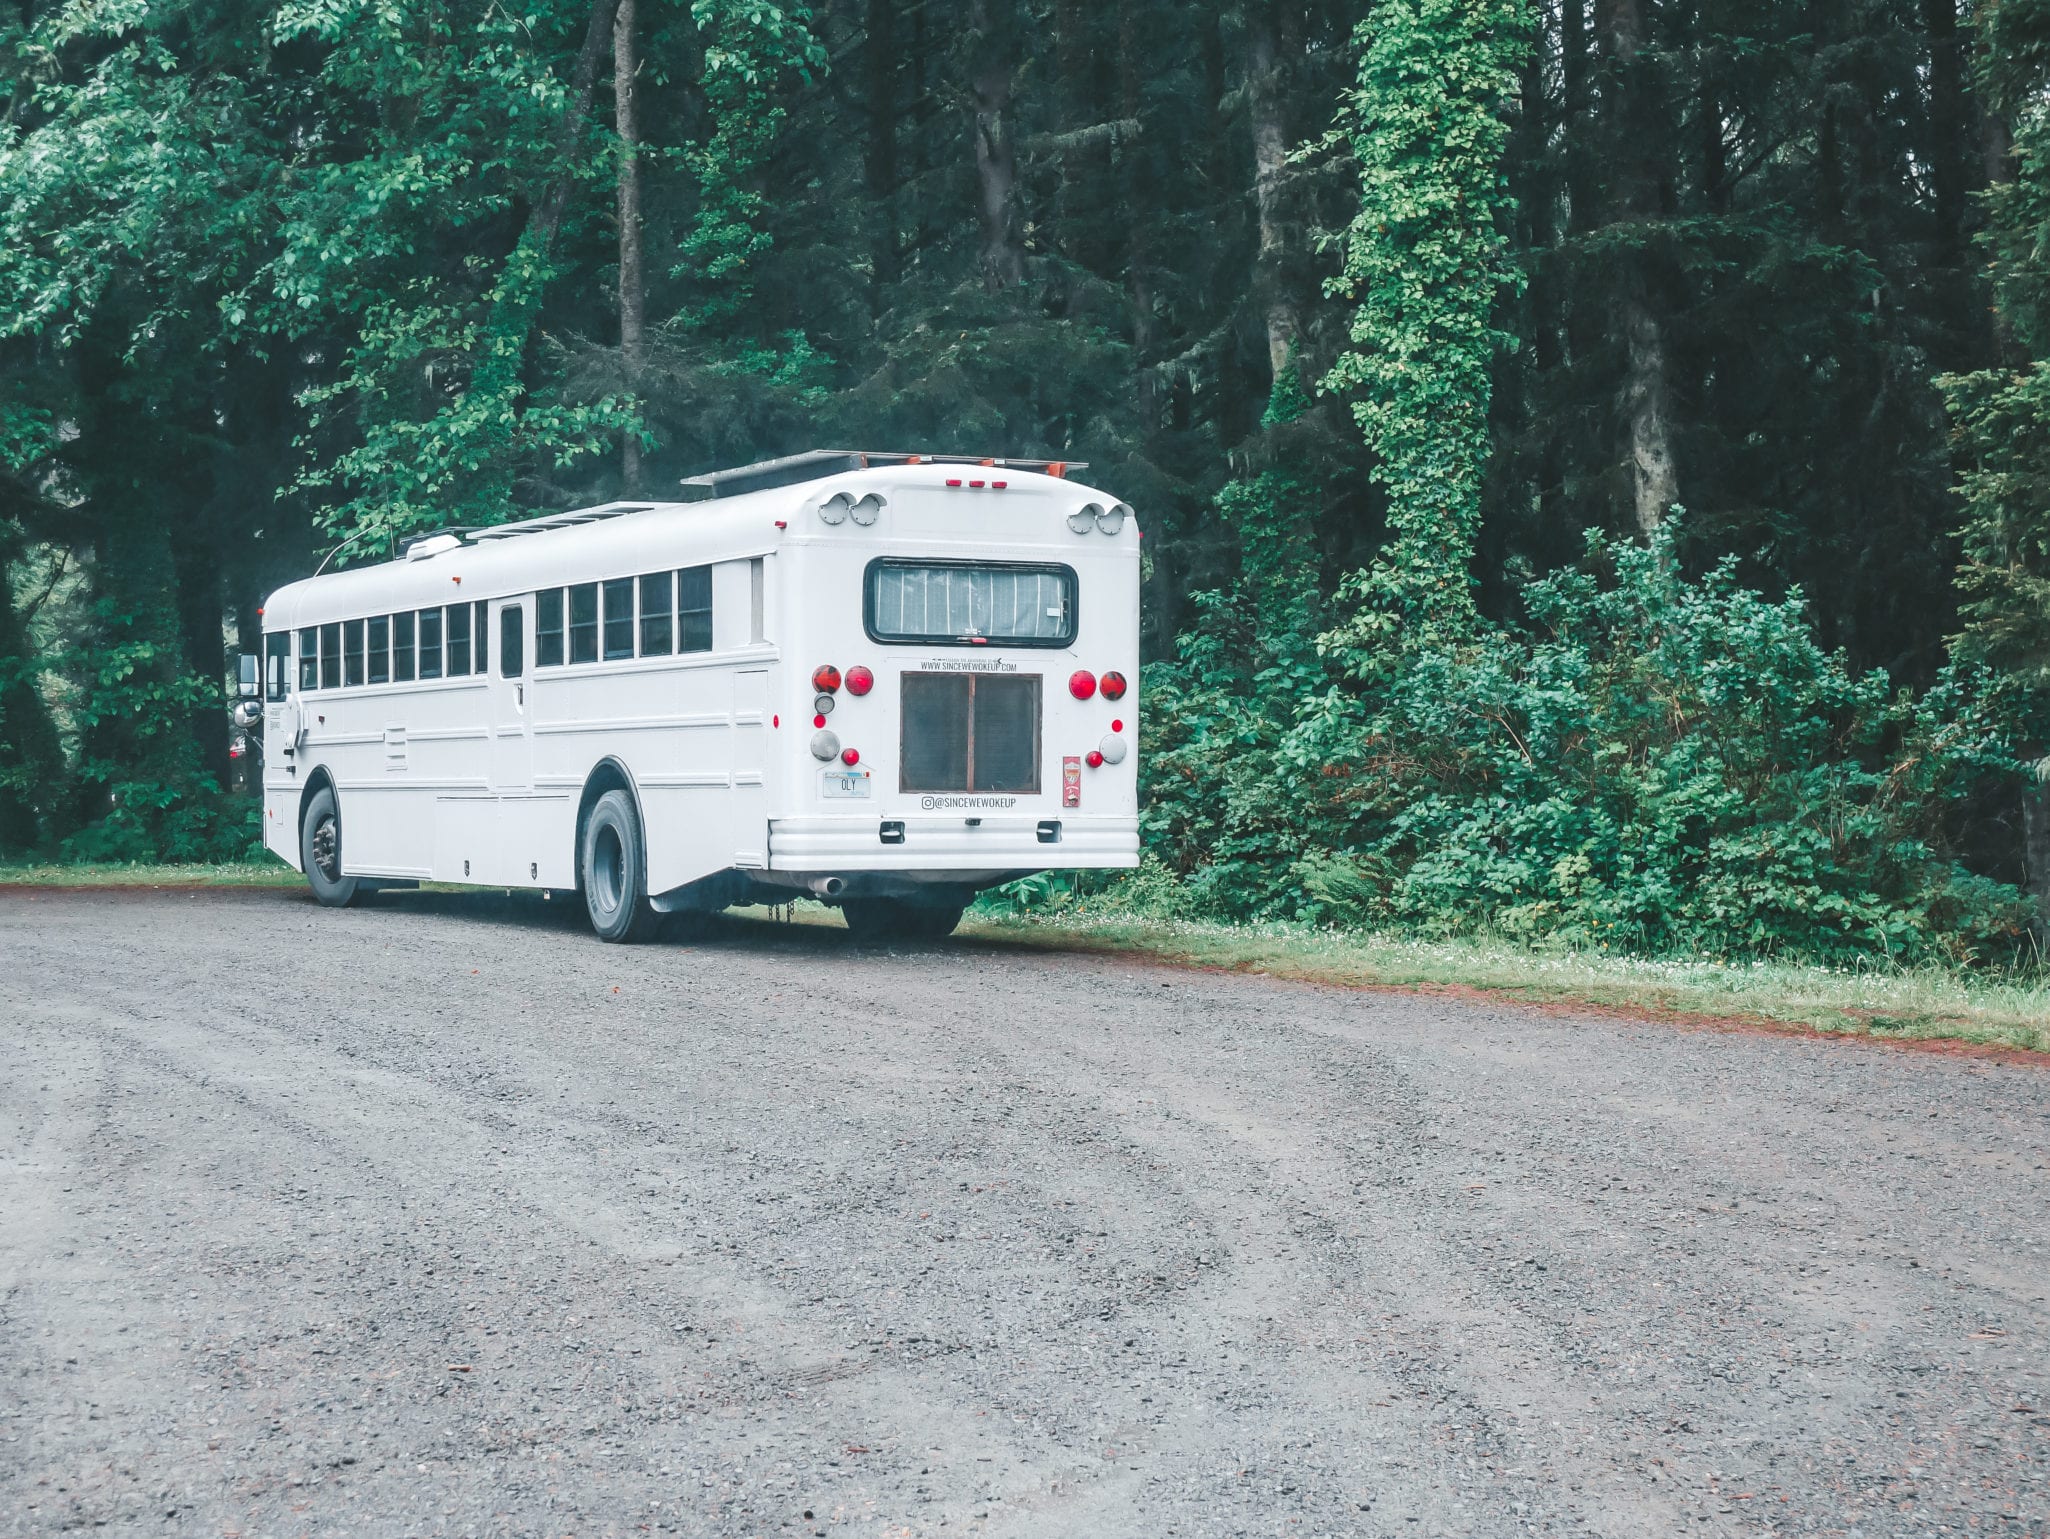 Social media can make bus life look absolutely glamorous, but the truth is, there are downsides to living in a school bus. | Since We Woke Up | sincewewokeup.com